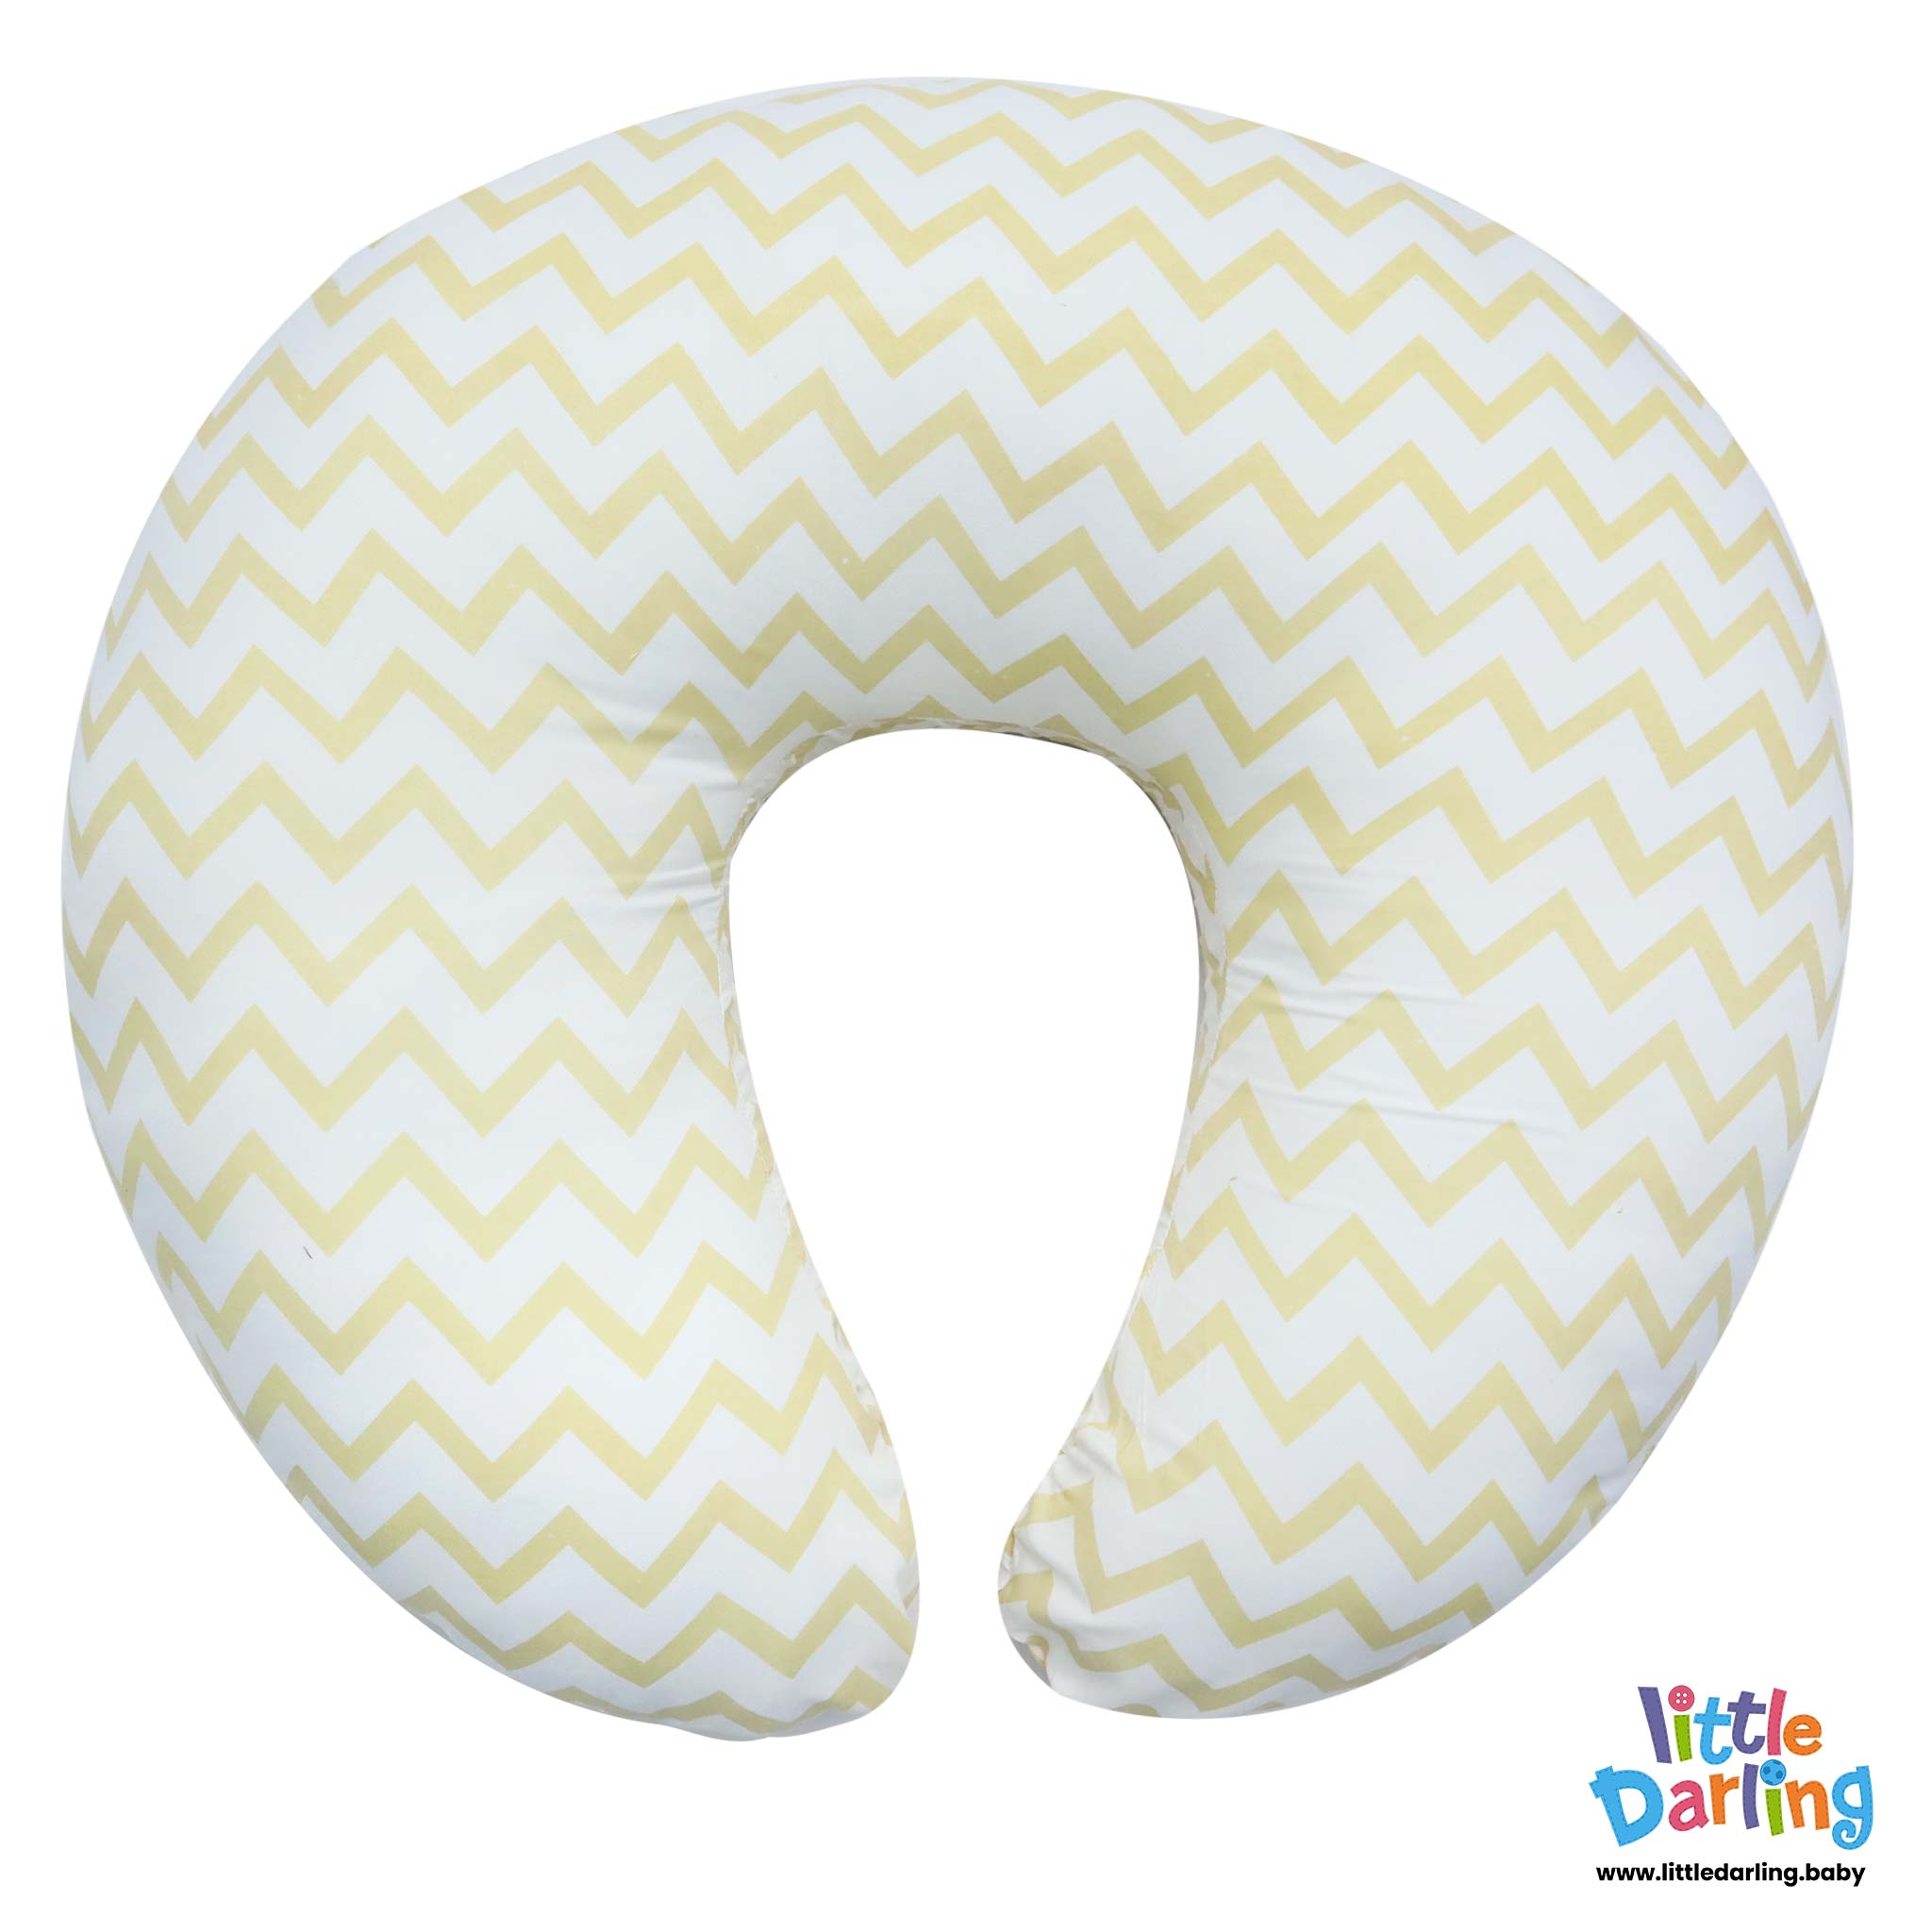 Feeding Pillow White Color Zig Zag Print by Little Darling